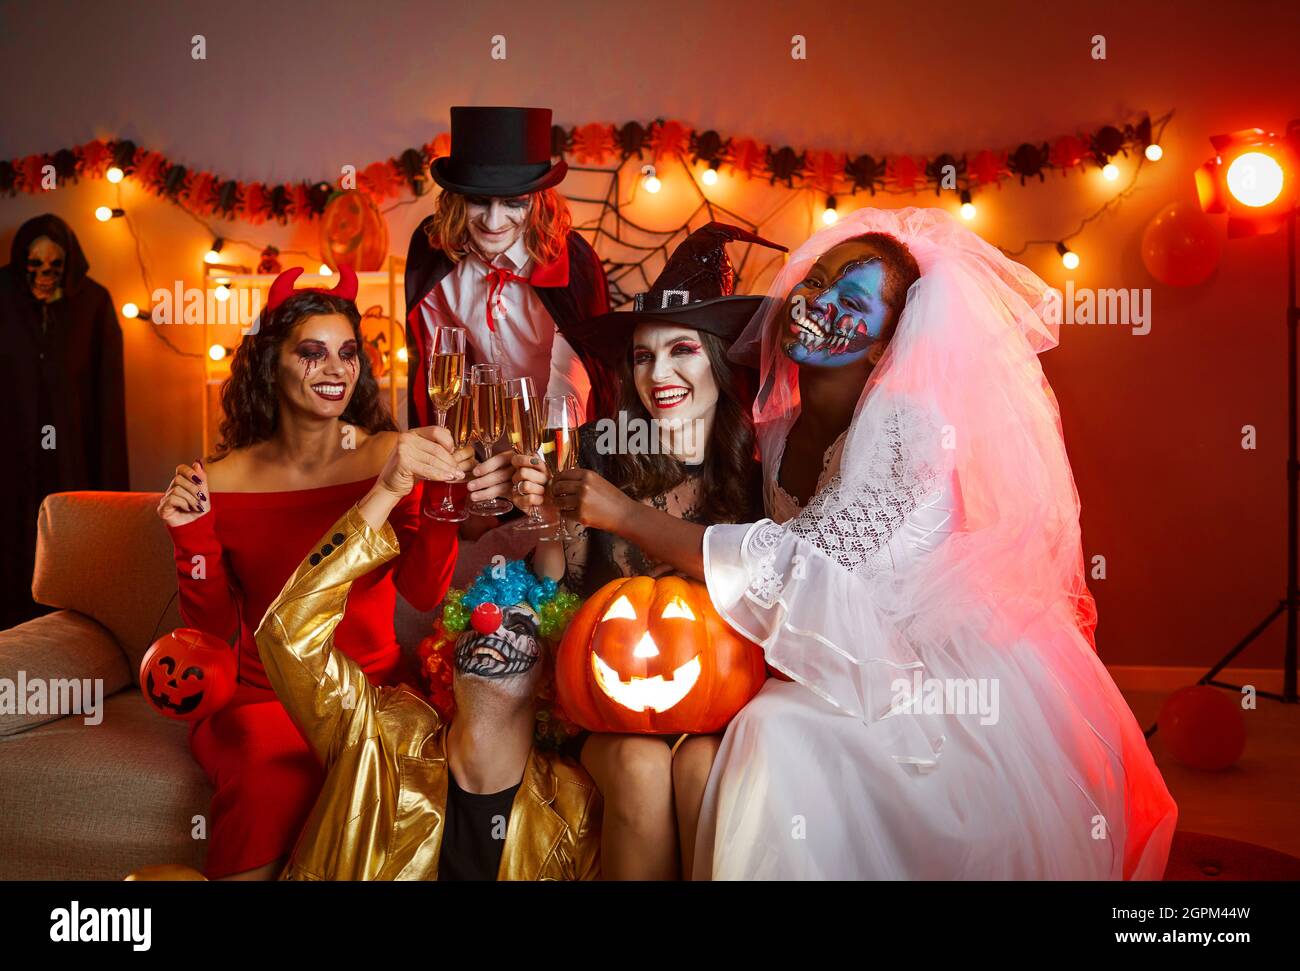 Group of cheerful friends in spooky halloween costumes posing with glasses of champagne in hands. Stock Photo